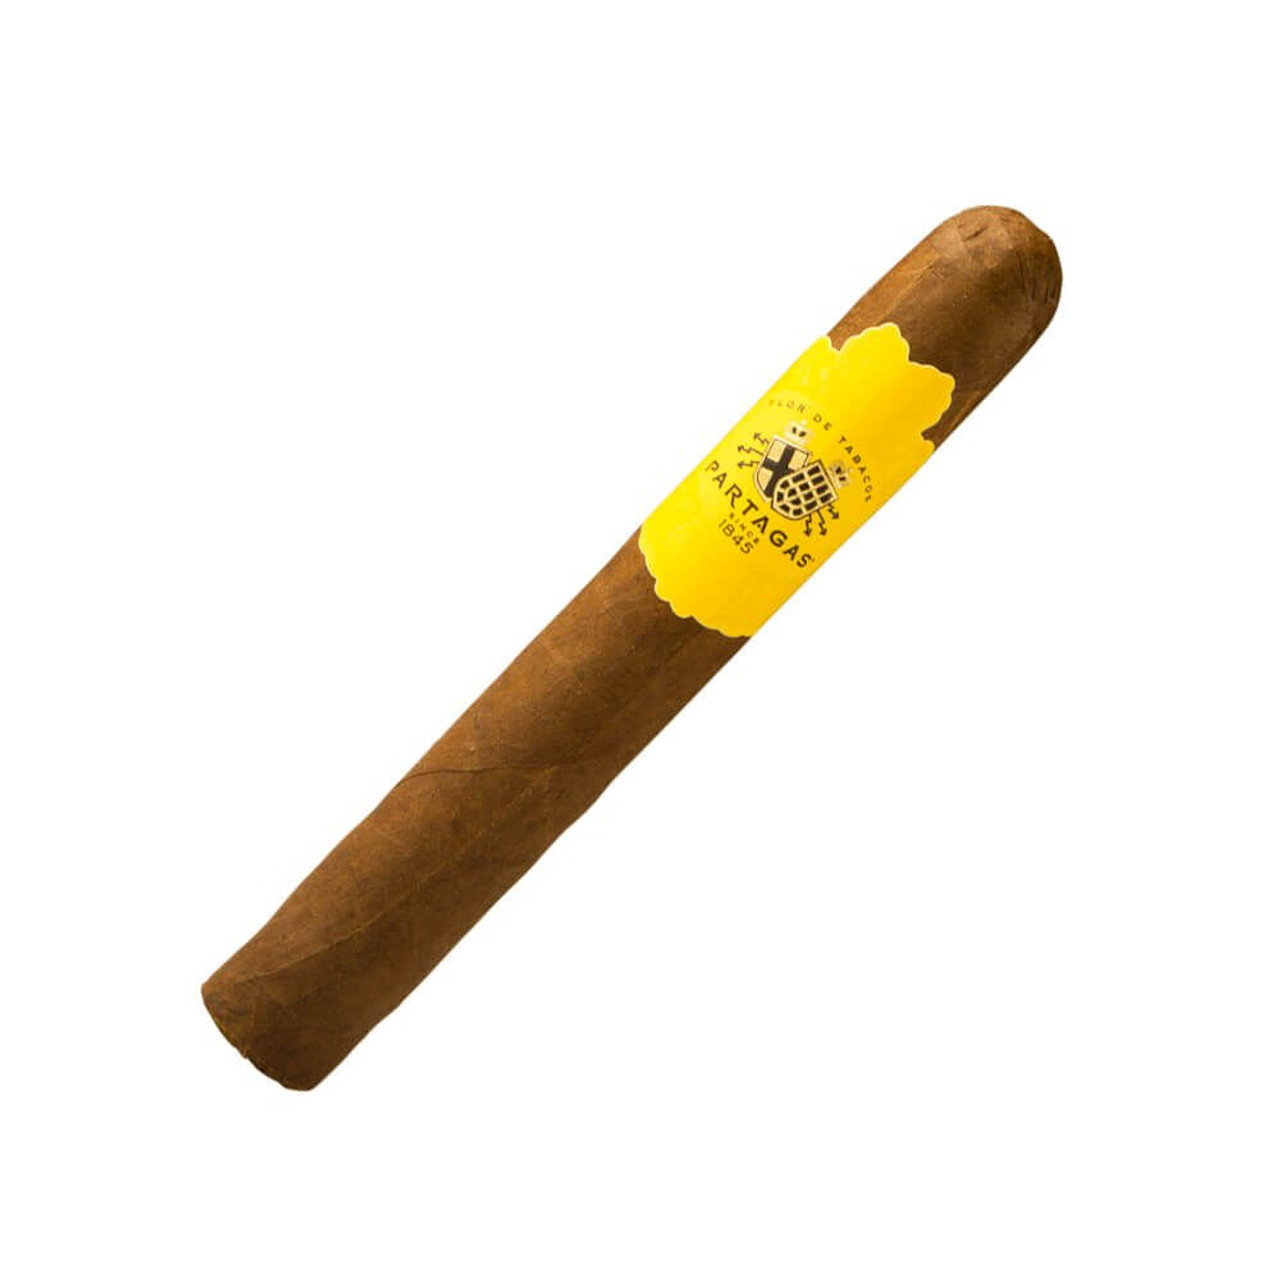 Partagas Naturales Cigars - 5.5 x 50 (Pack of 5)